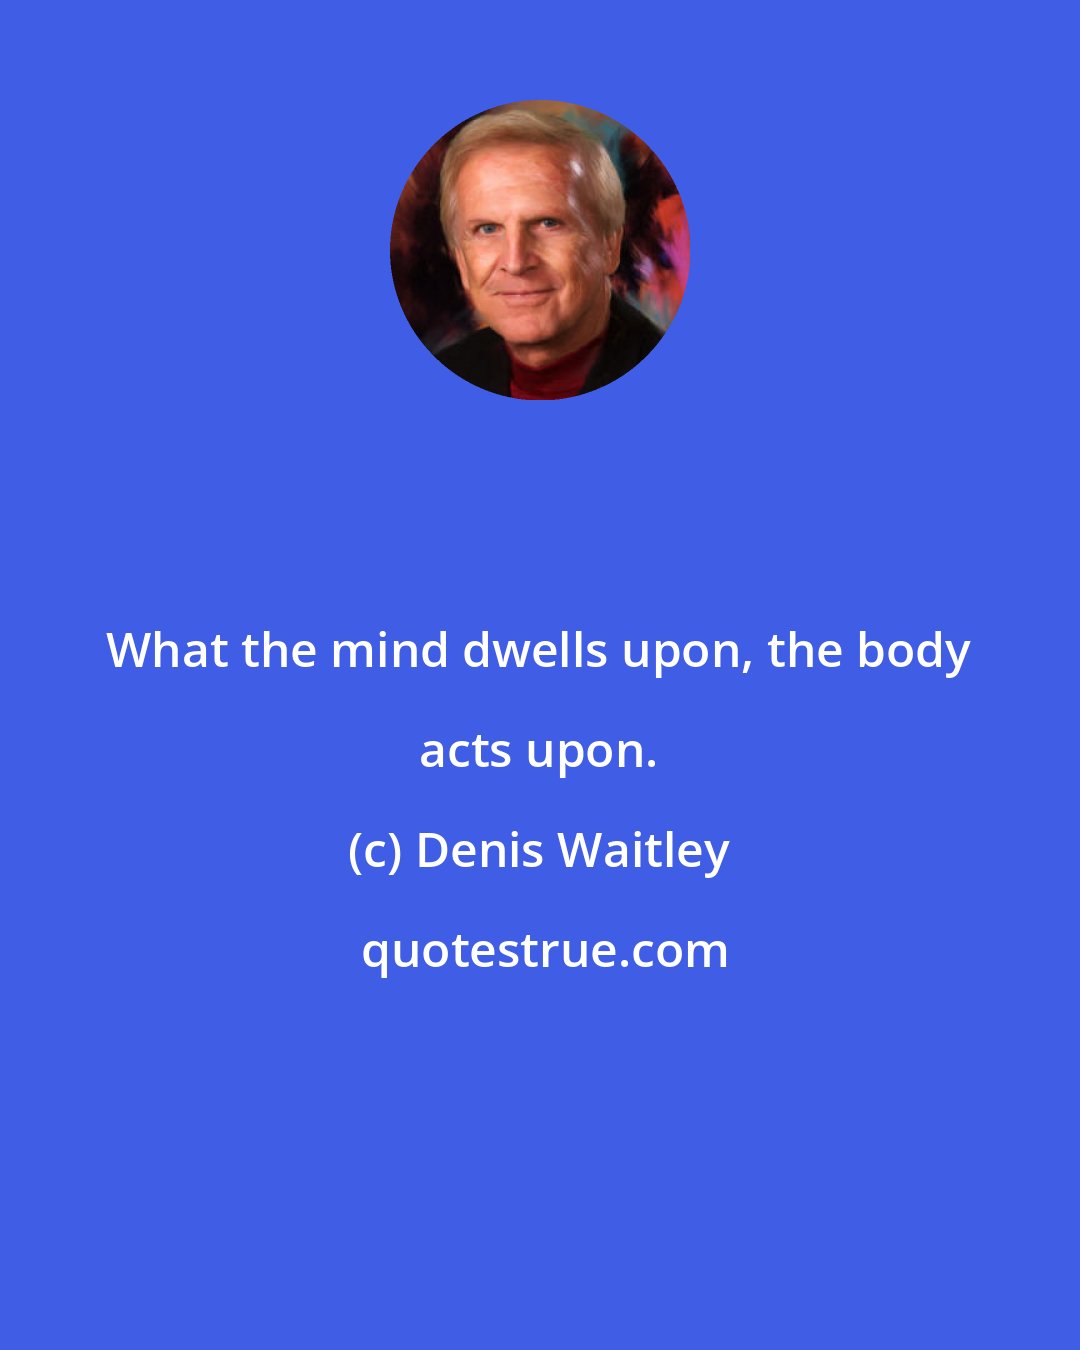 Denis Waitley: What the mind dwells upon, the body acts upon.